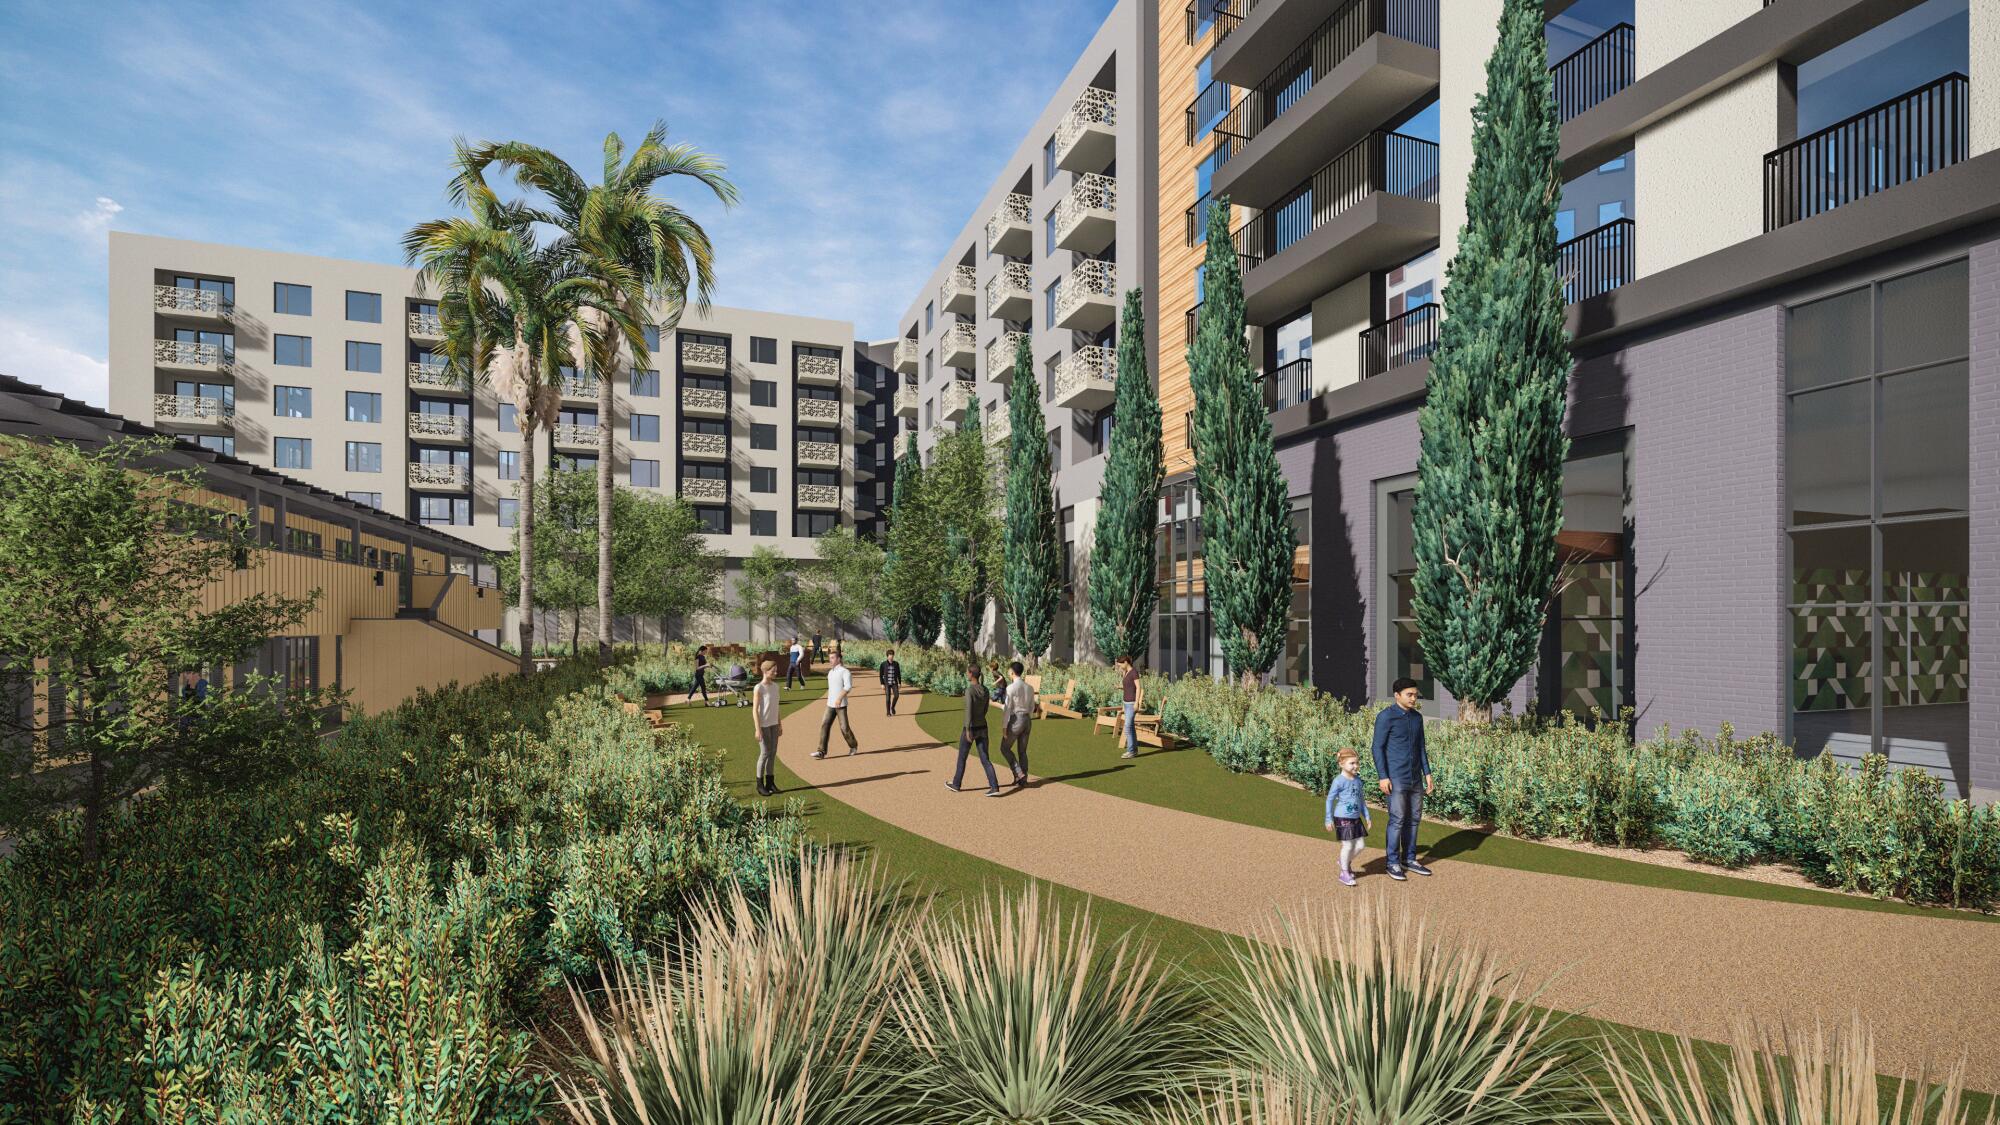 Fashion Valley is getting a resort-style makeover - The San Diego  Union-Tribune